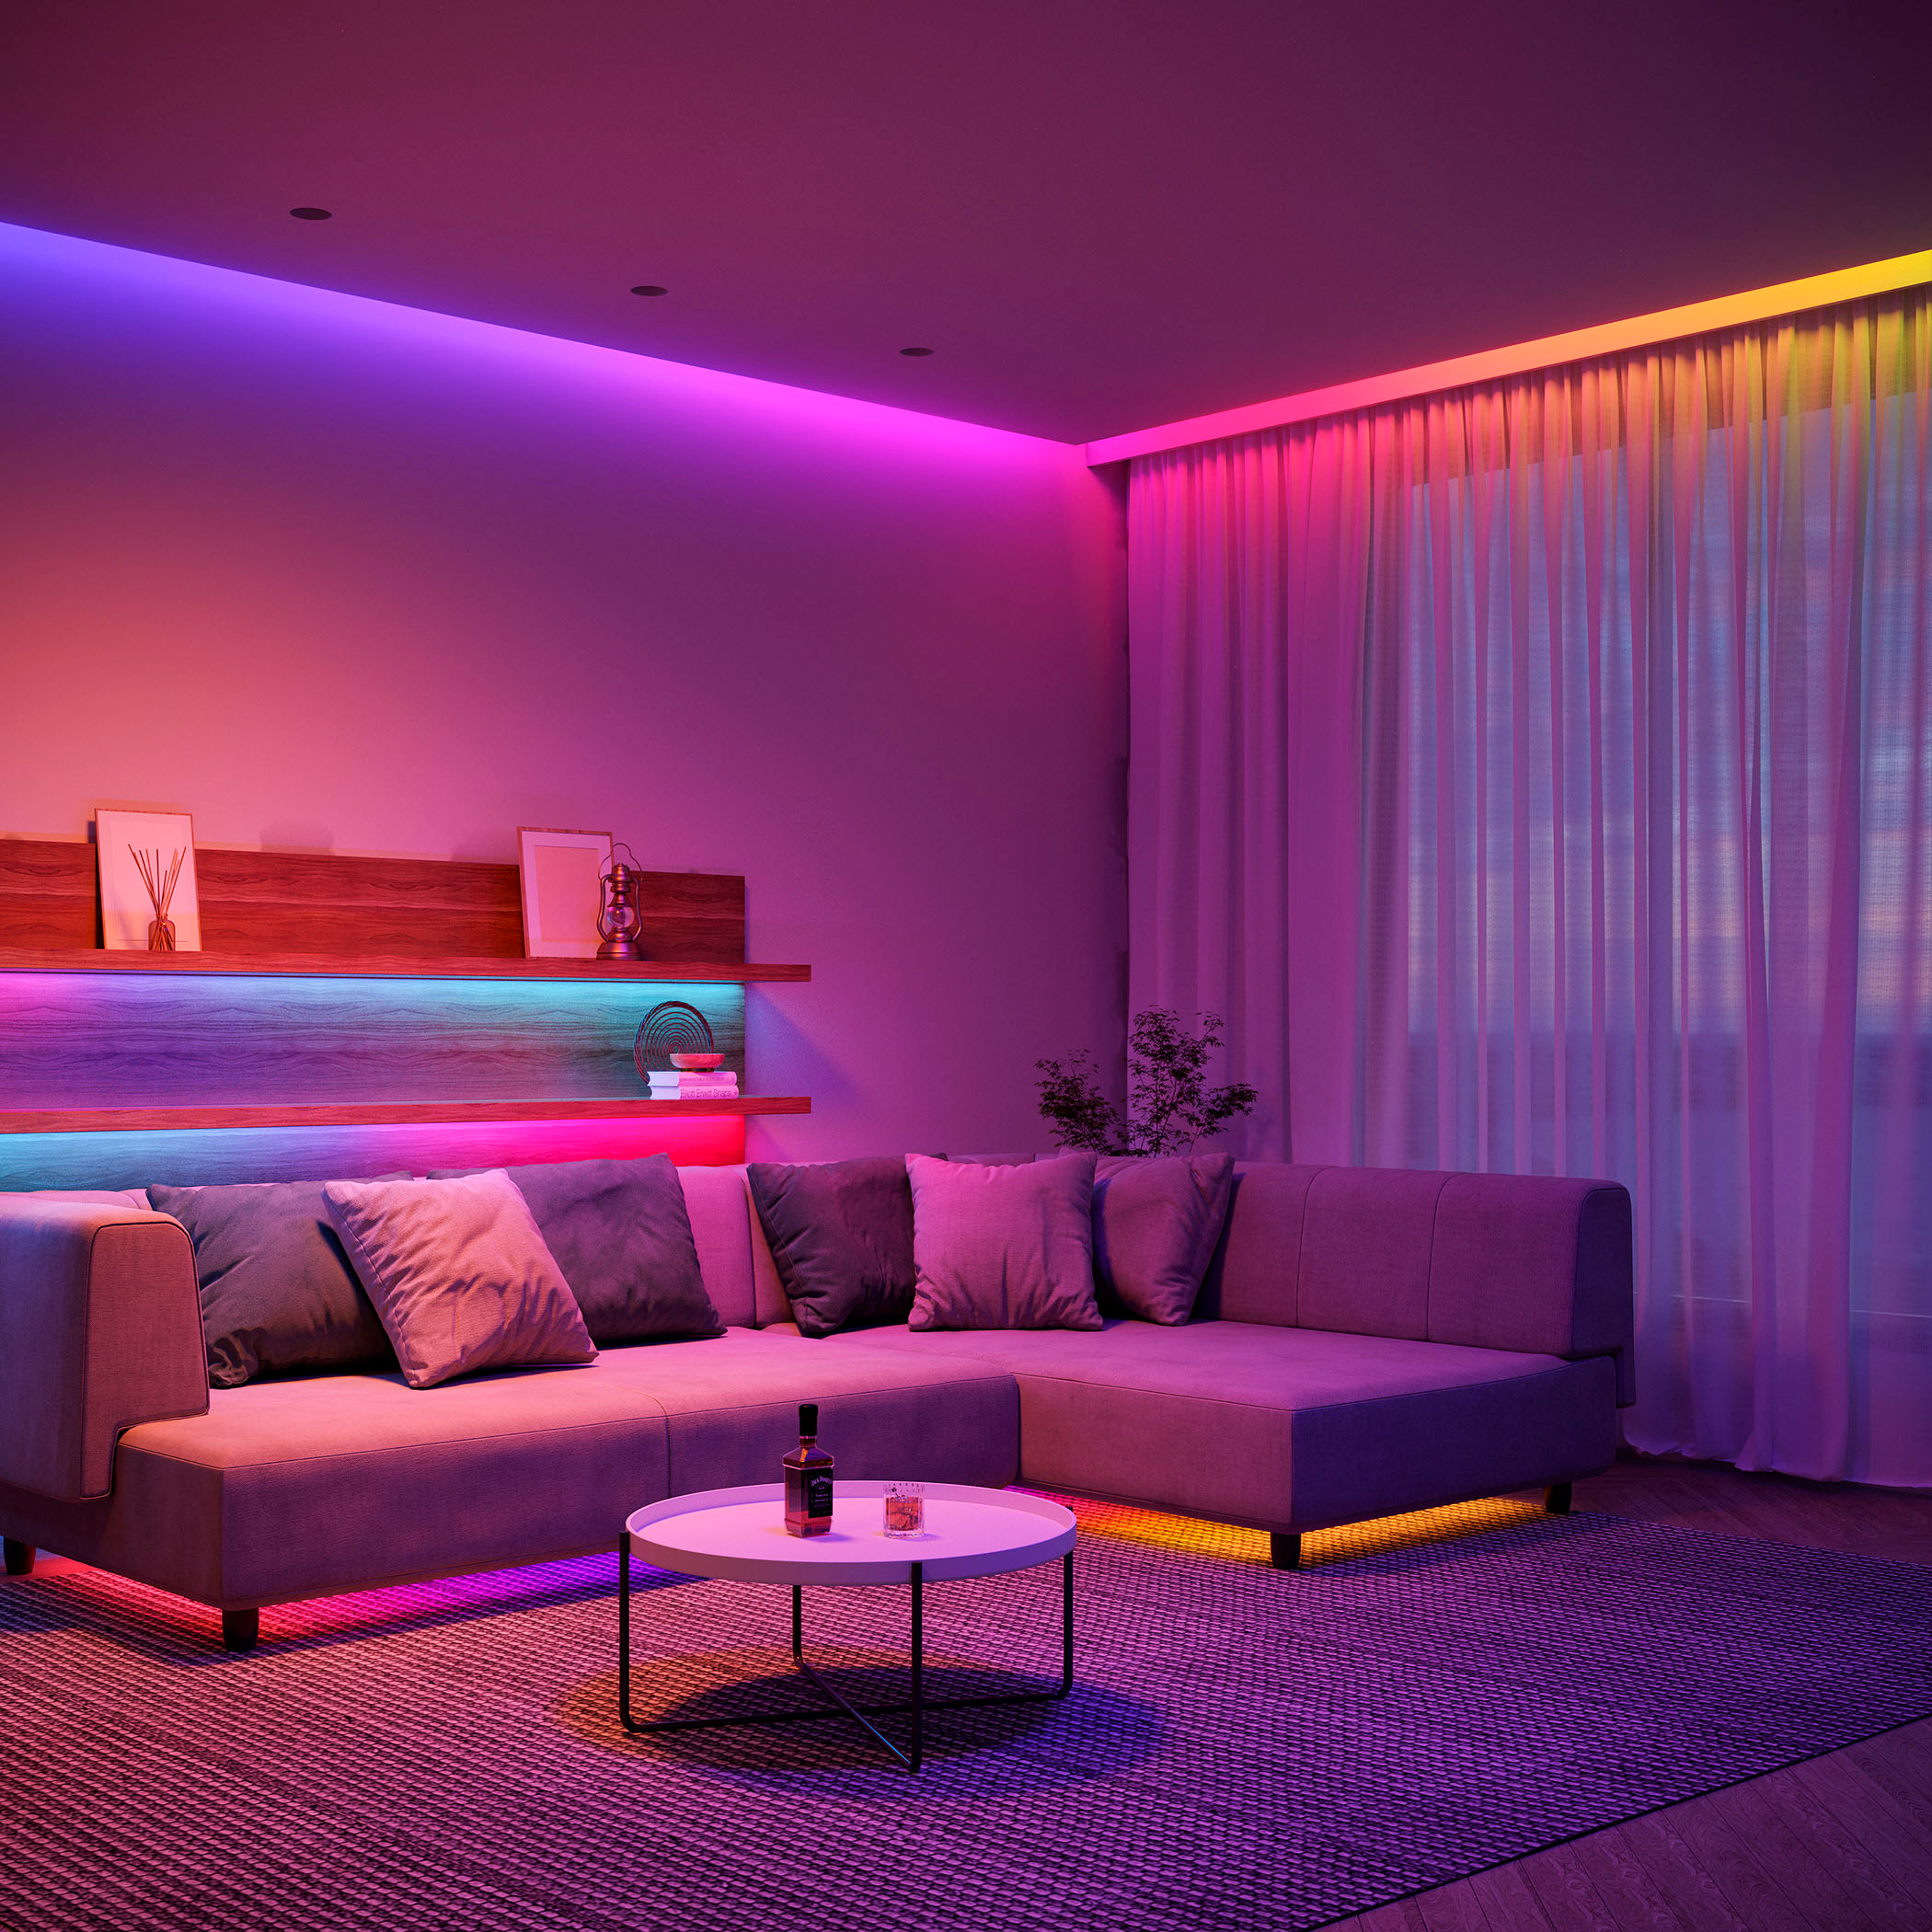 Govee's 50-foot Wi-Fi RGB LED Light Strip falls to new low at $18 (48%  off), more